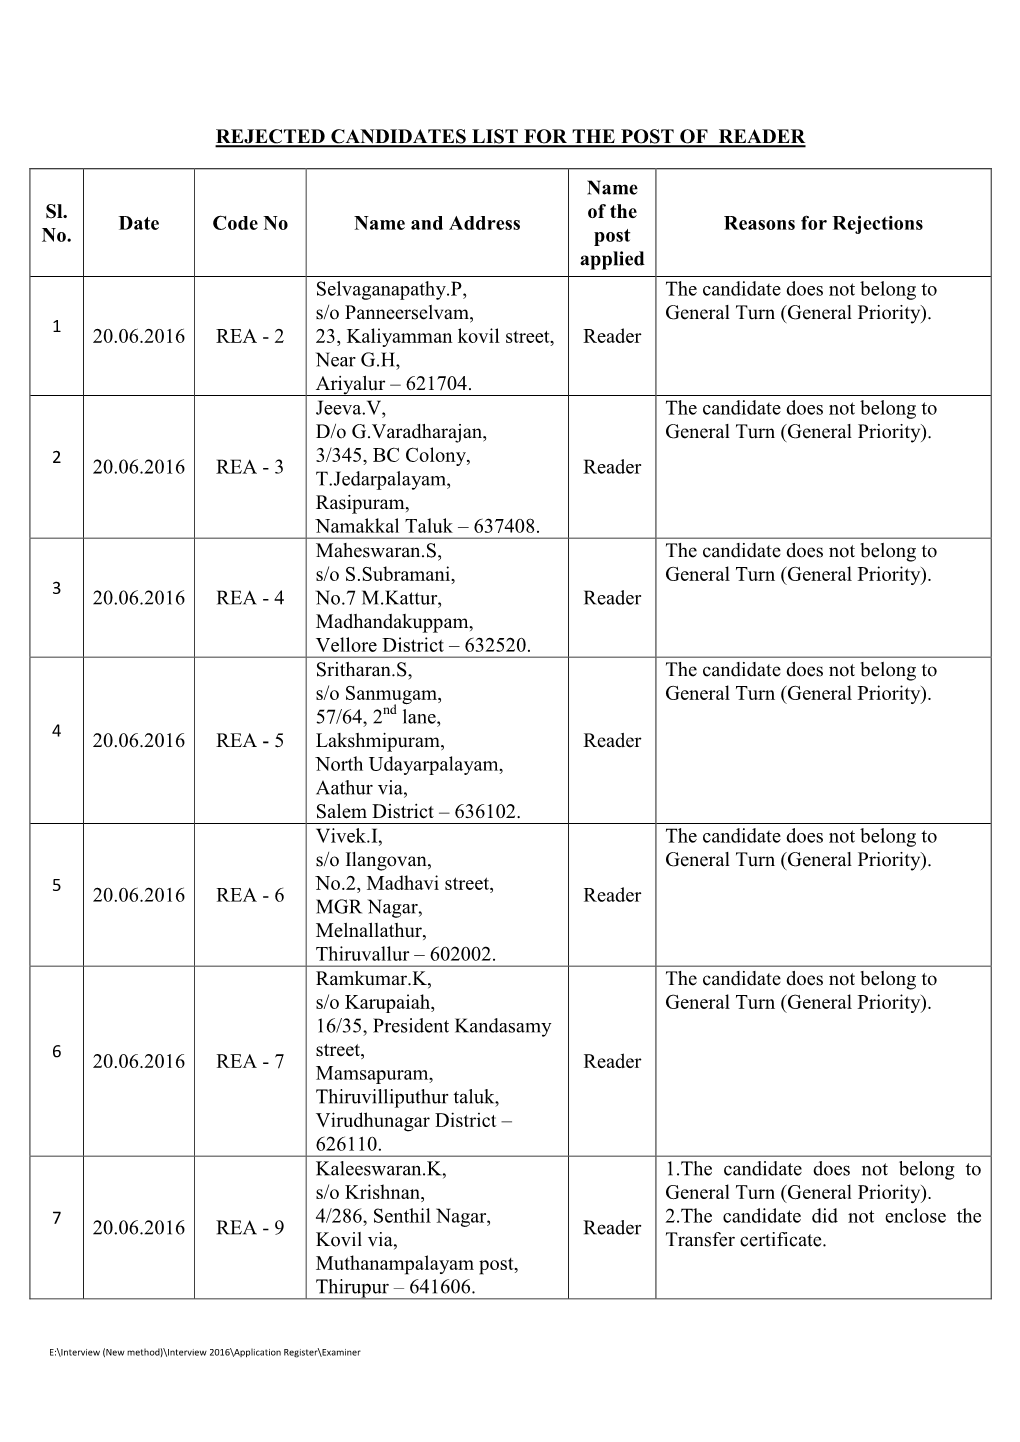 REJECTED CANDIDATES LIST for the POST of READER Sl. No. Date Code No Name and Address Name of the Post Applied Reasons For